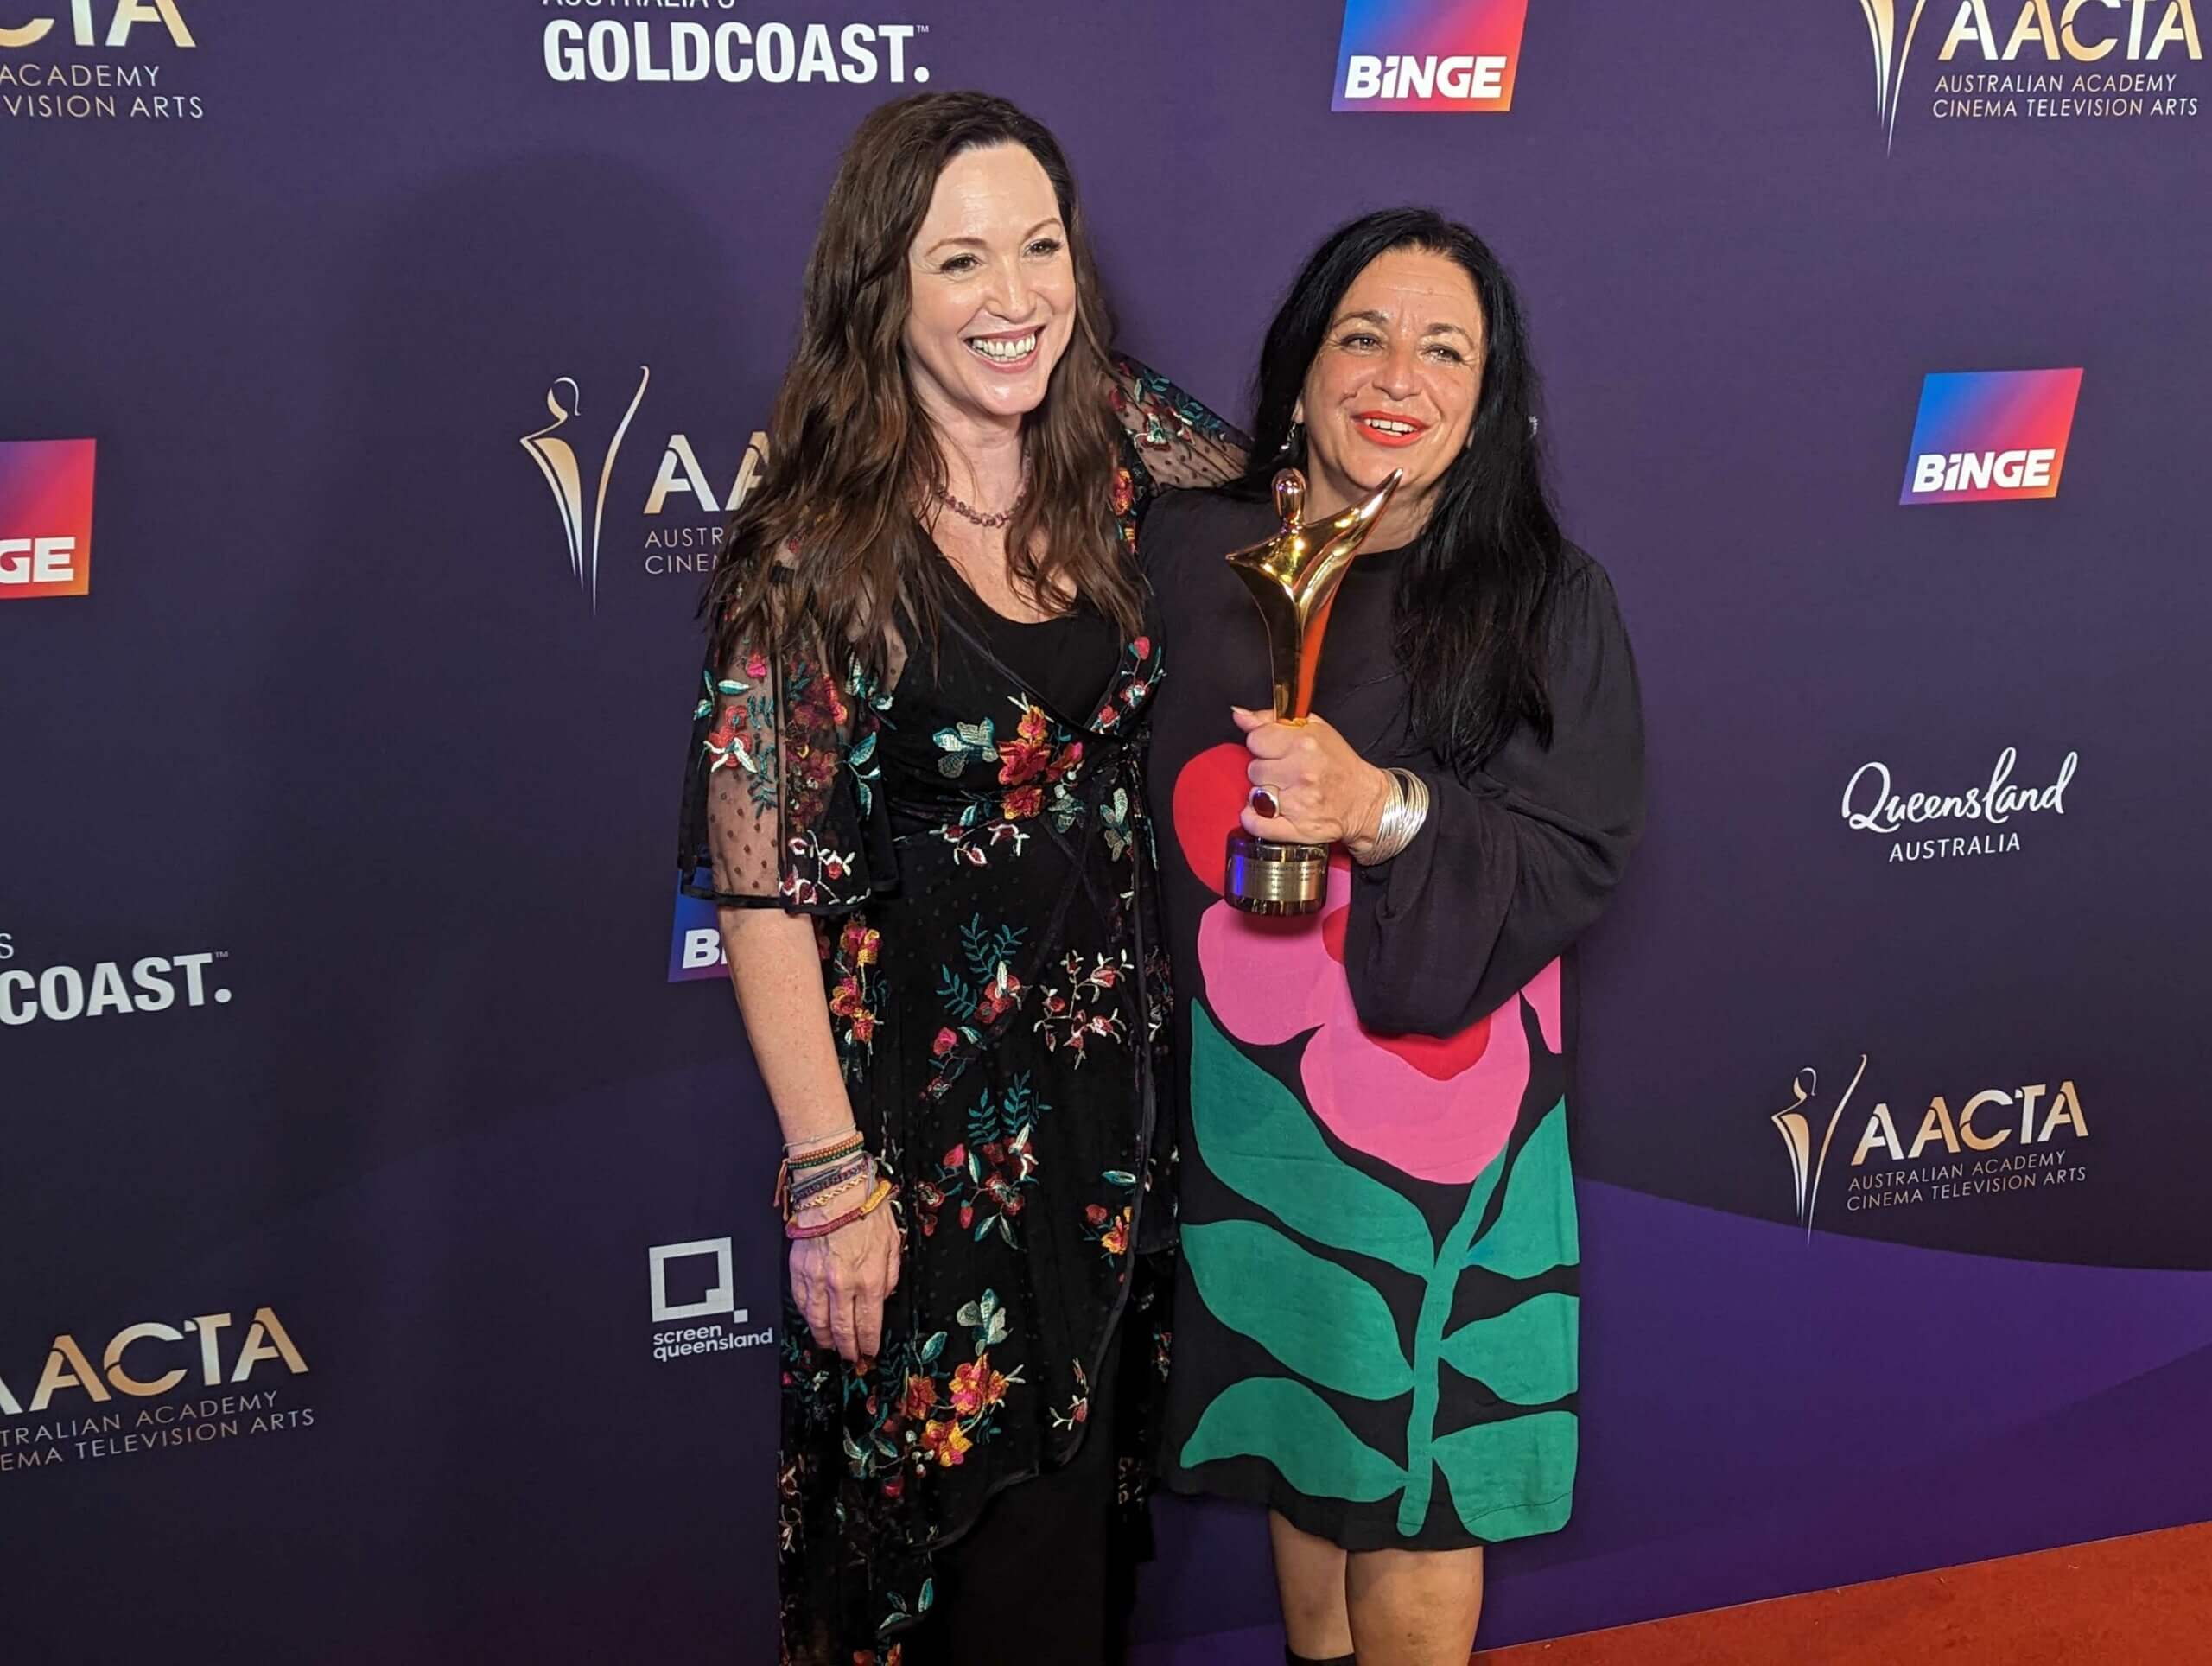 Anousha Zarkesh (Shayda), winner of the AACTA Award for Best Casting in a Film, sponsored by Casting Networks